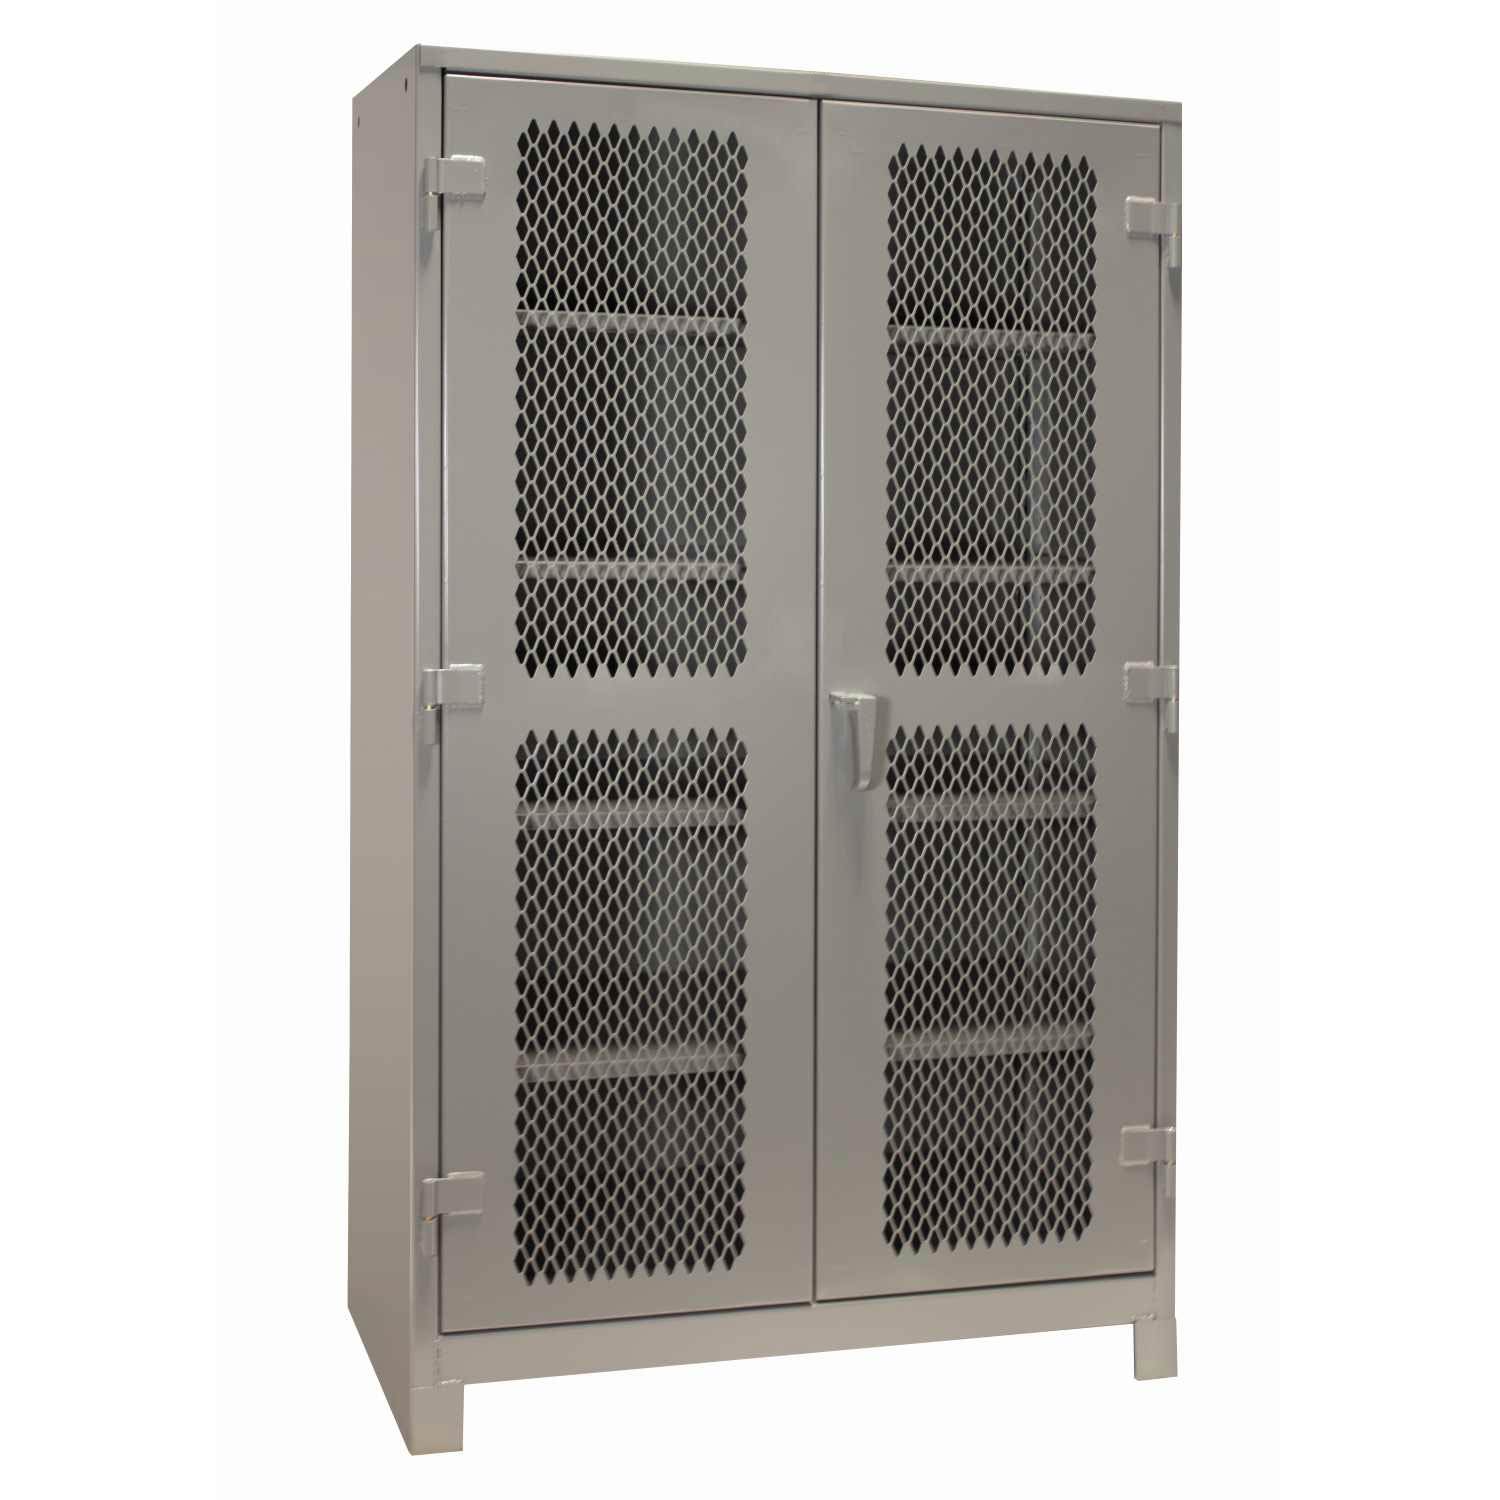 All-welded visible cabinet dove gray 1120DP